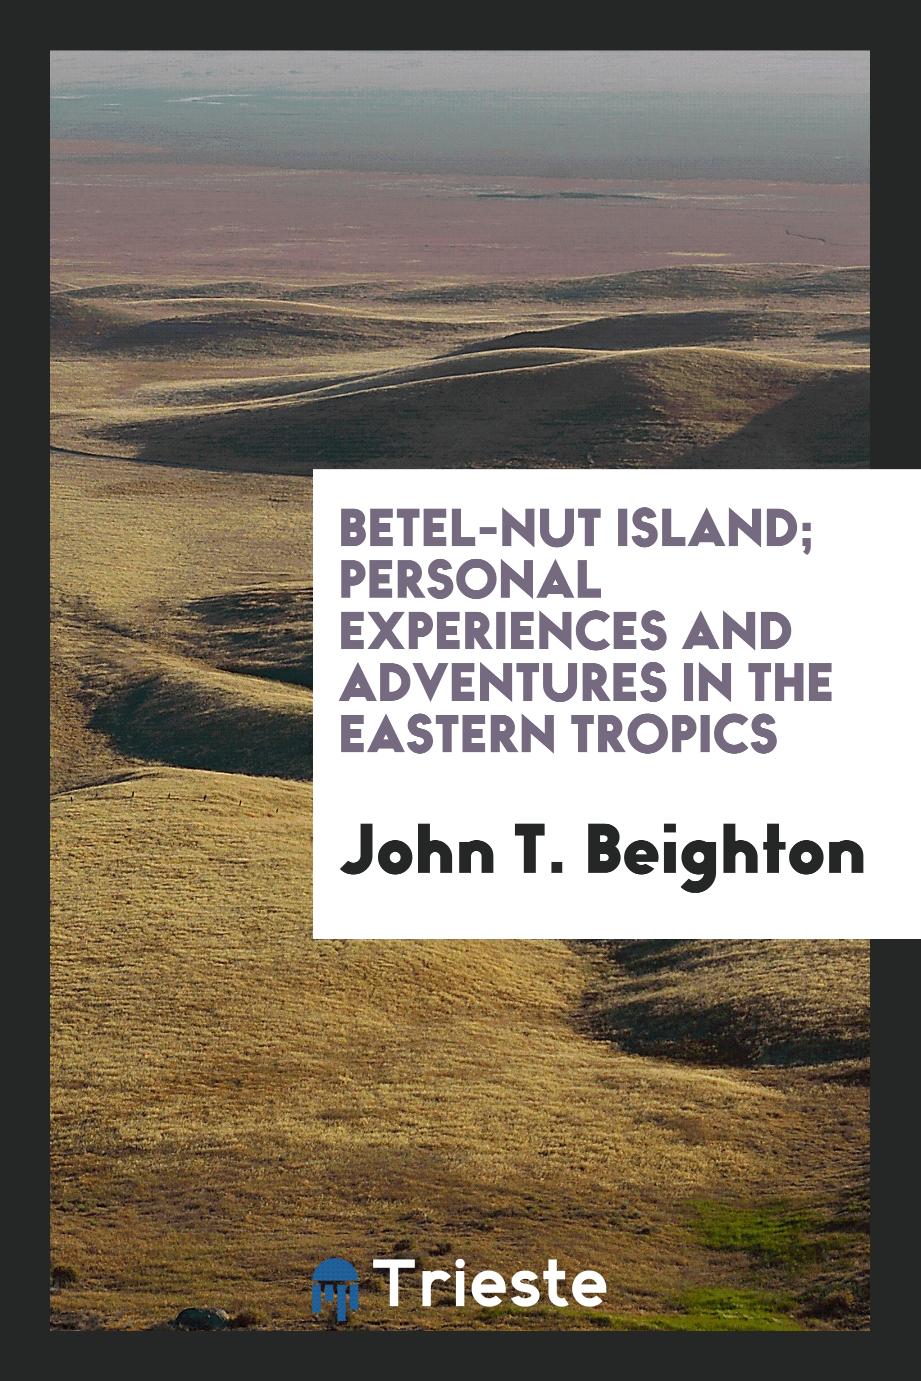 Betel-nut island; personal experiences and adventures in the eastern tropics